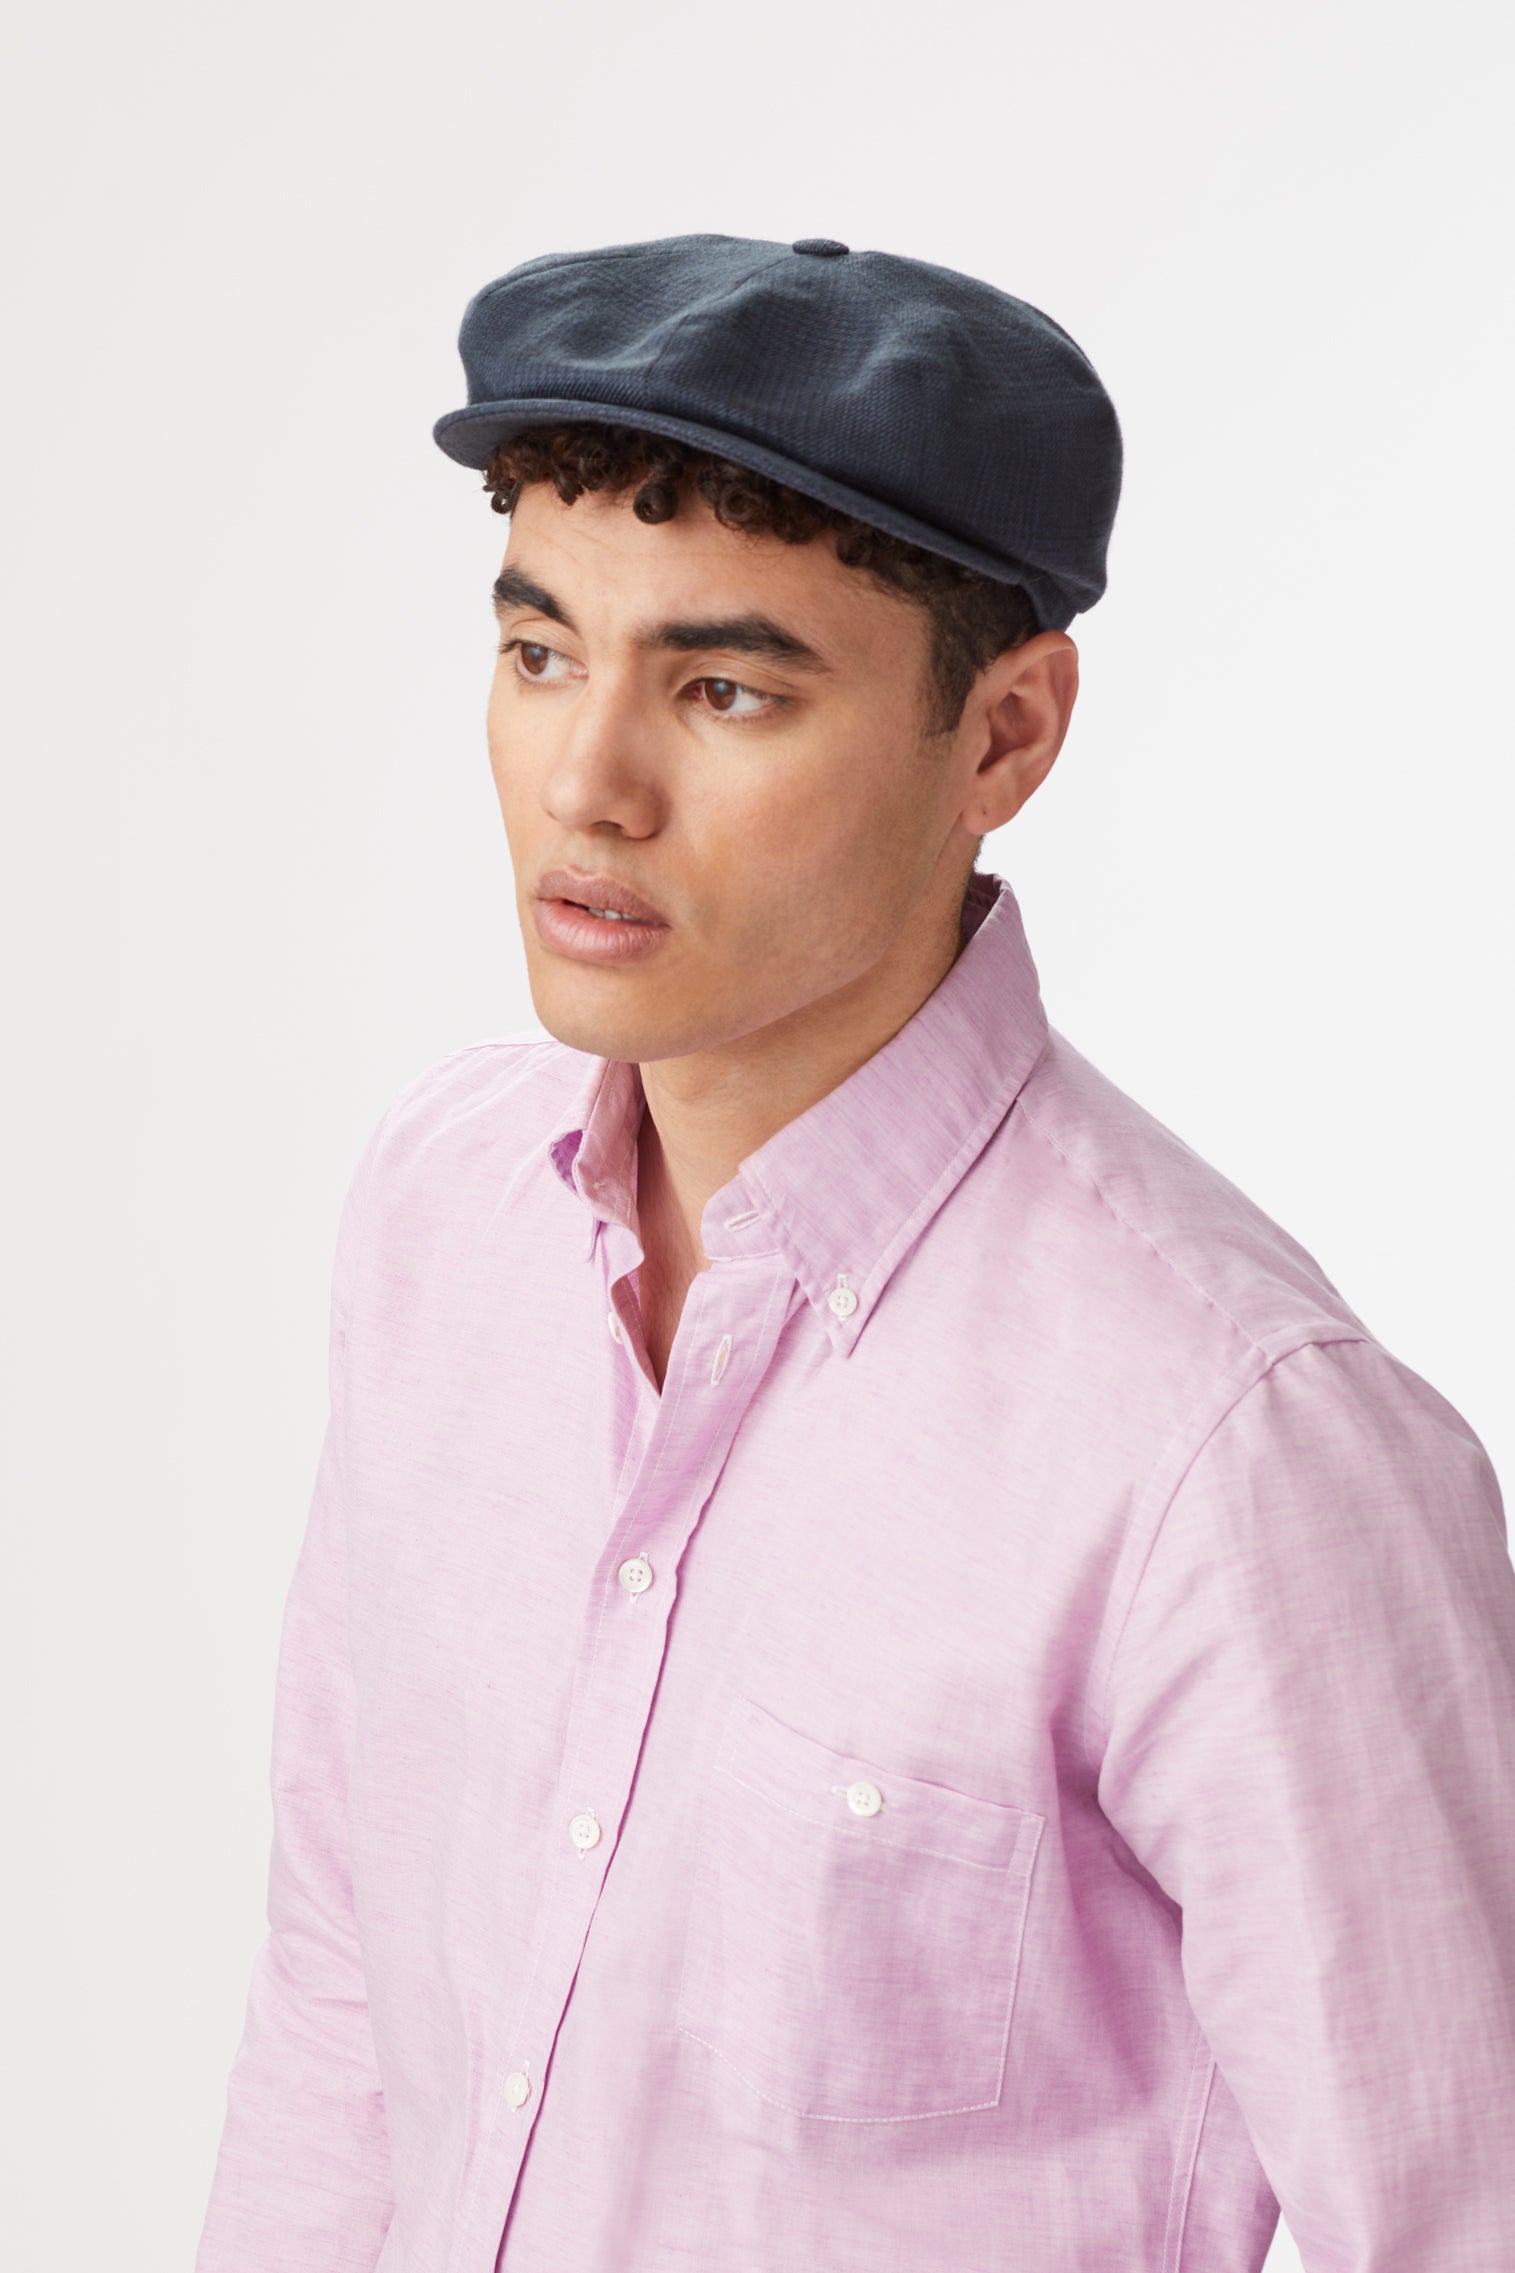 Tremelo Linen Navy Check Bakerboy Cap - Father's Day Gift Guide - Lock & Co. Hatters London UK